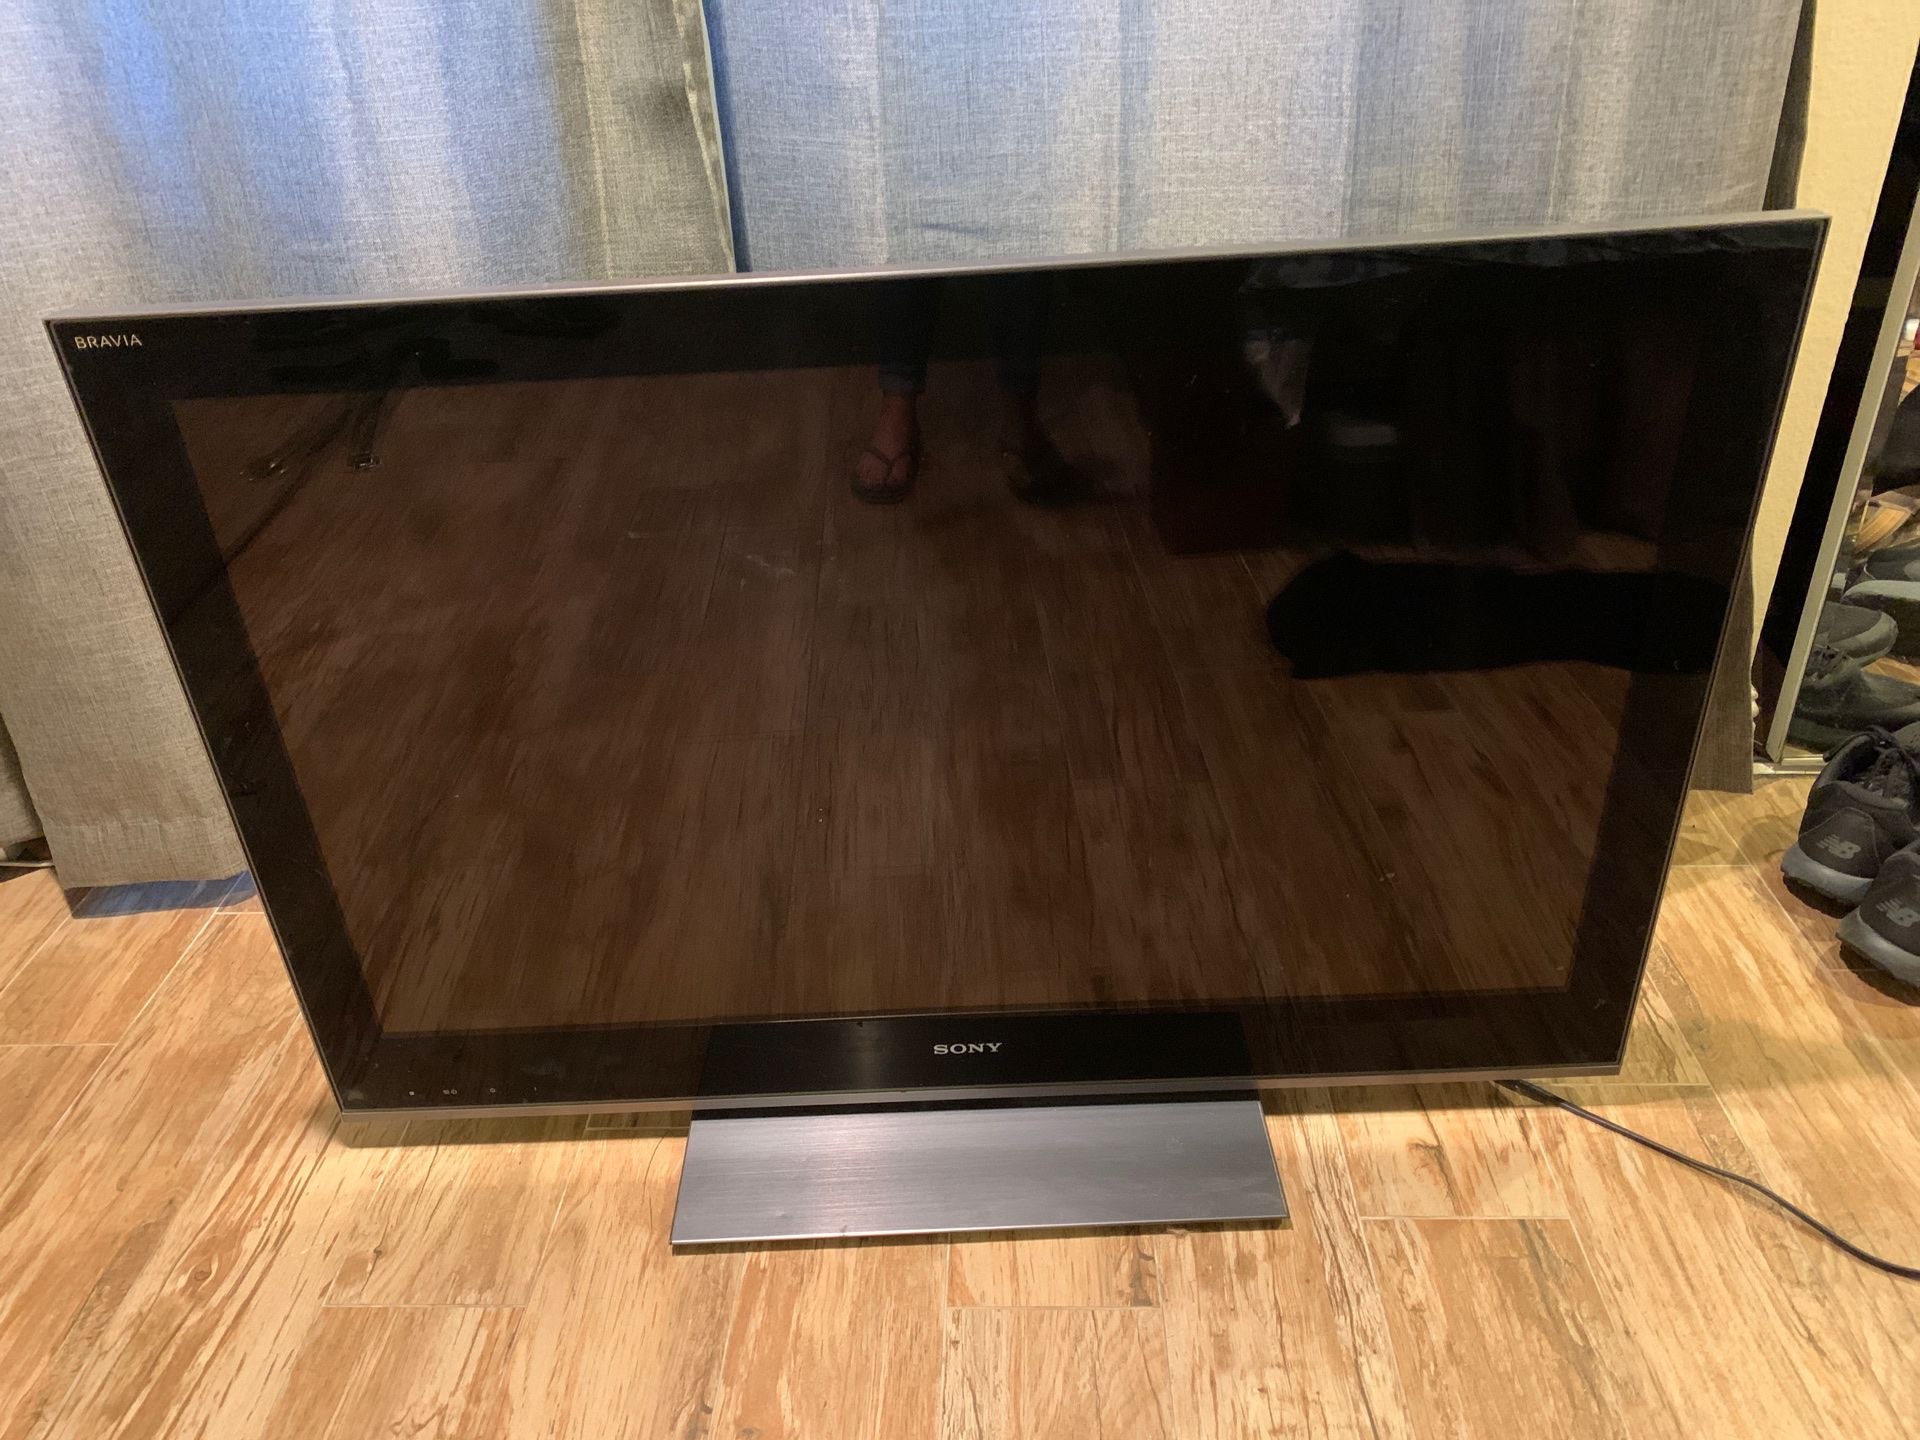 Sony 40” tv 📺 with remote!